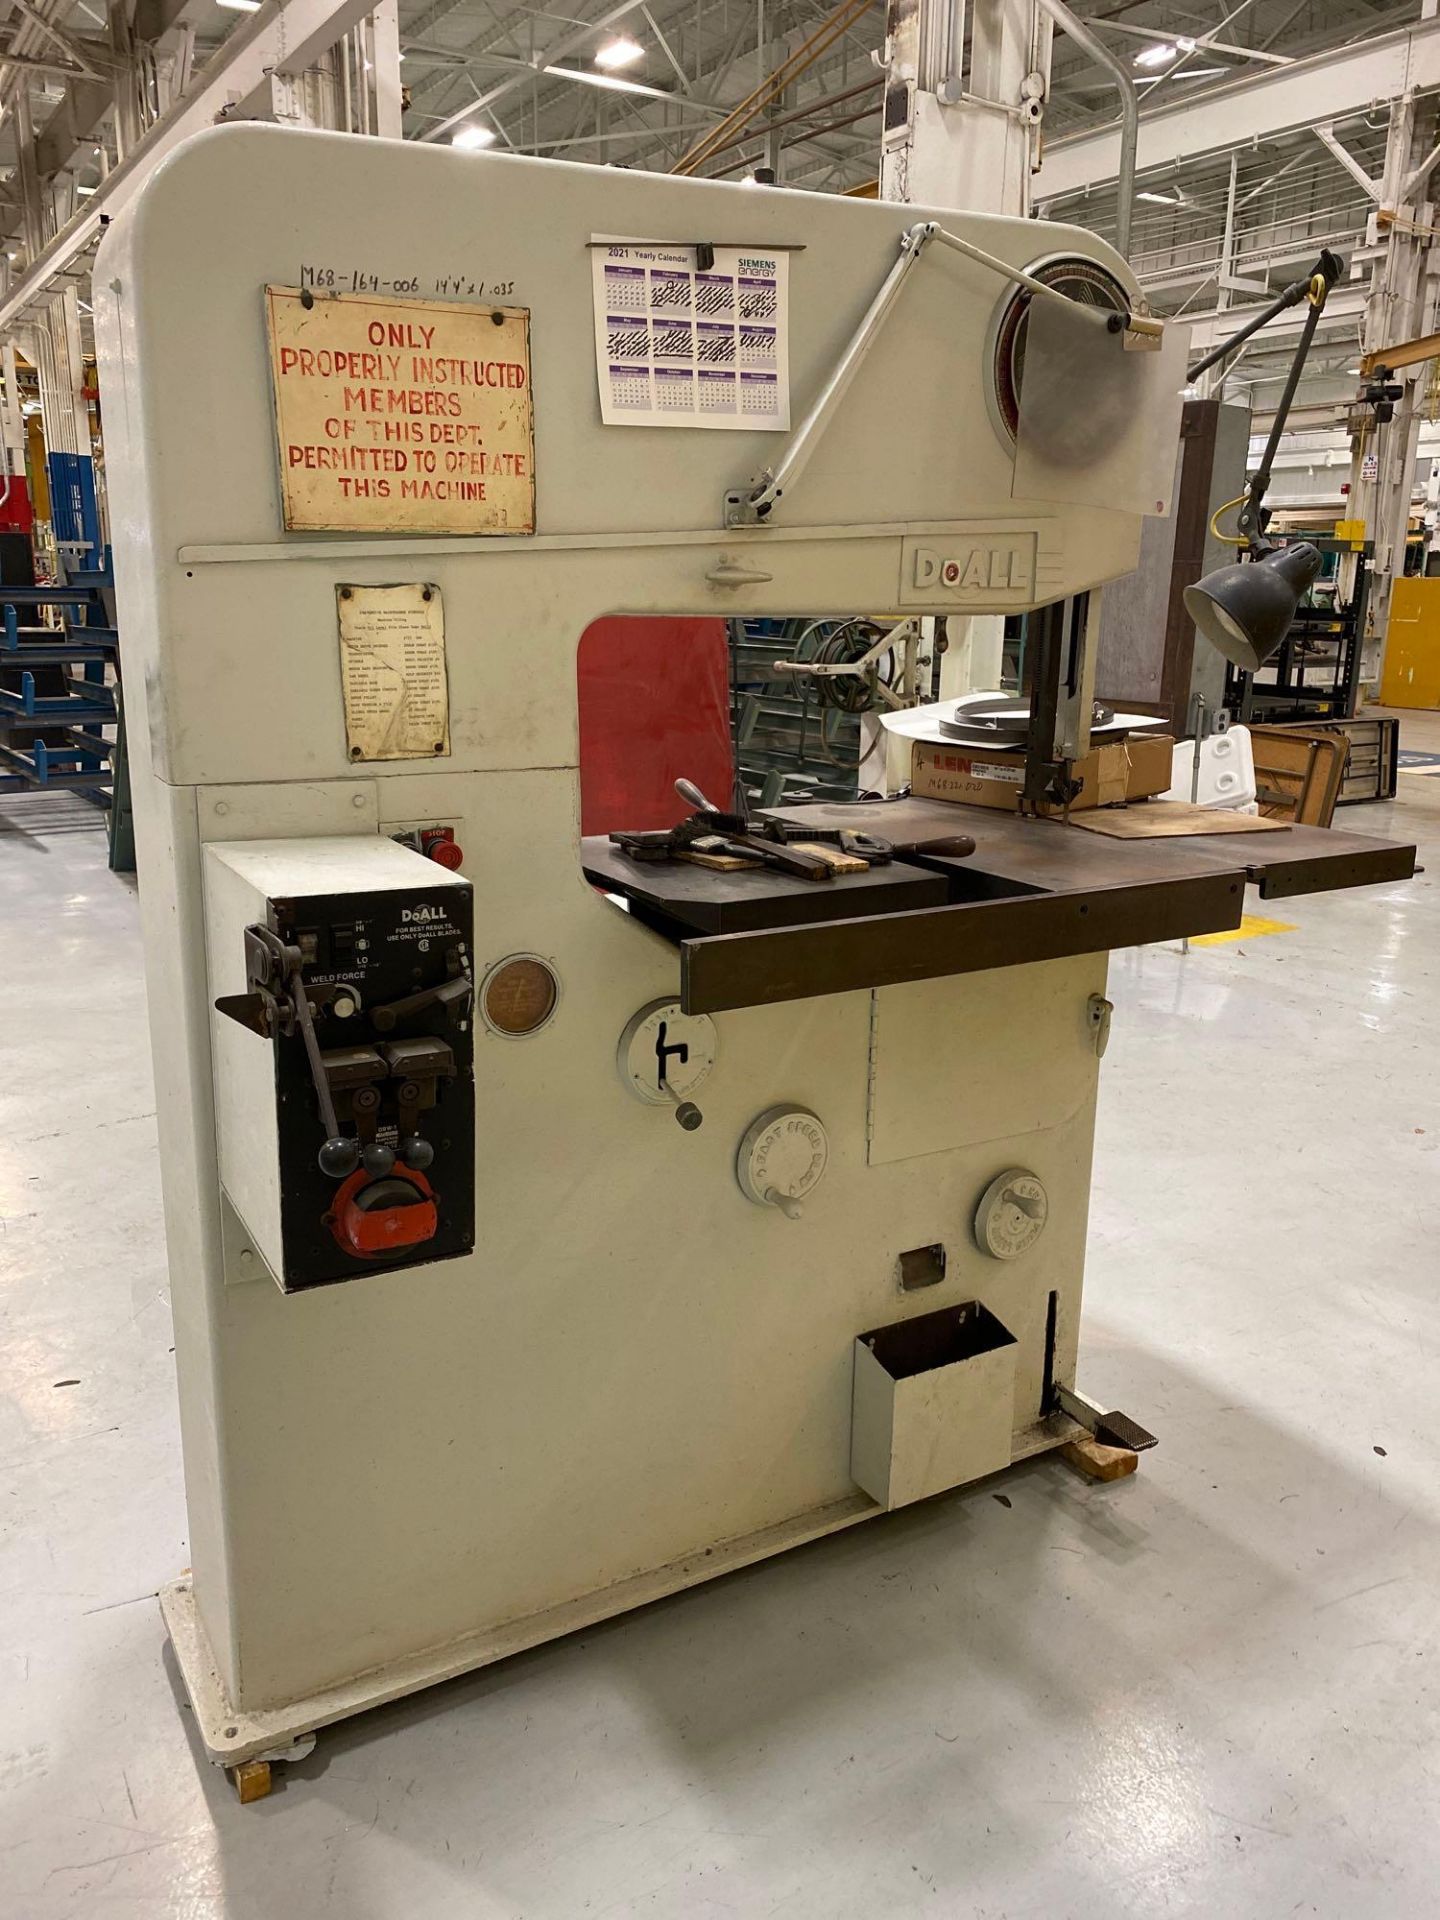 36in DoAll Vertical Bandsaw #36-2A